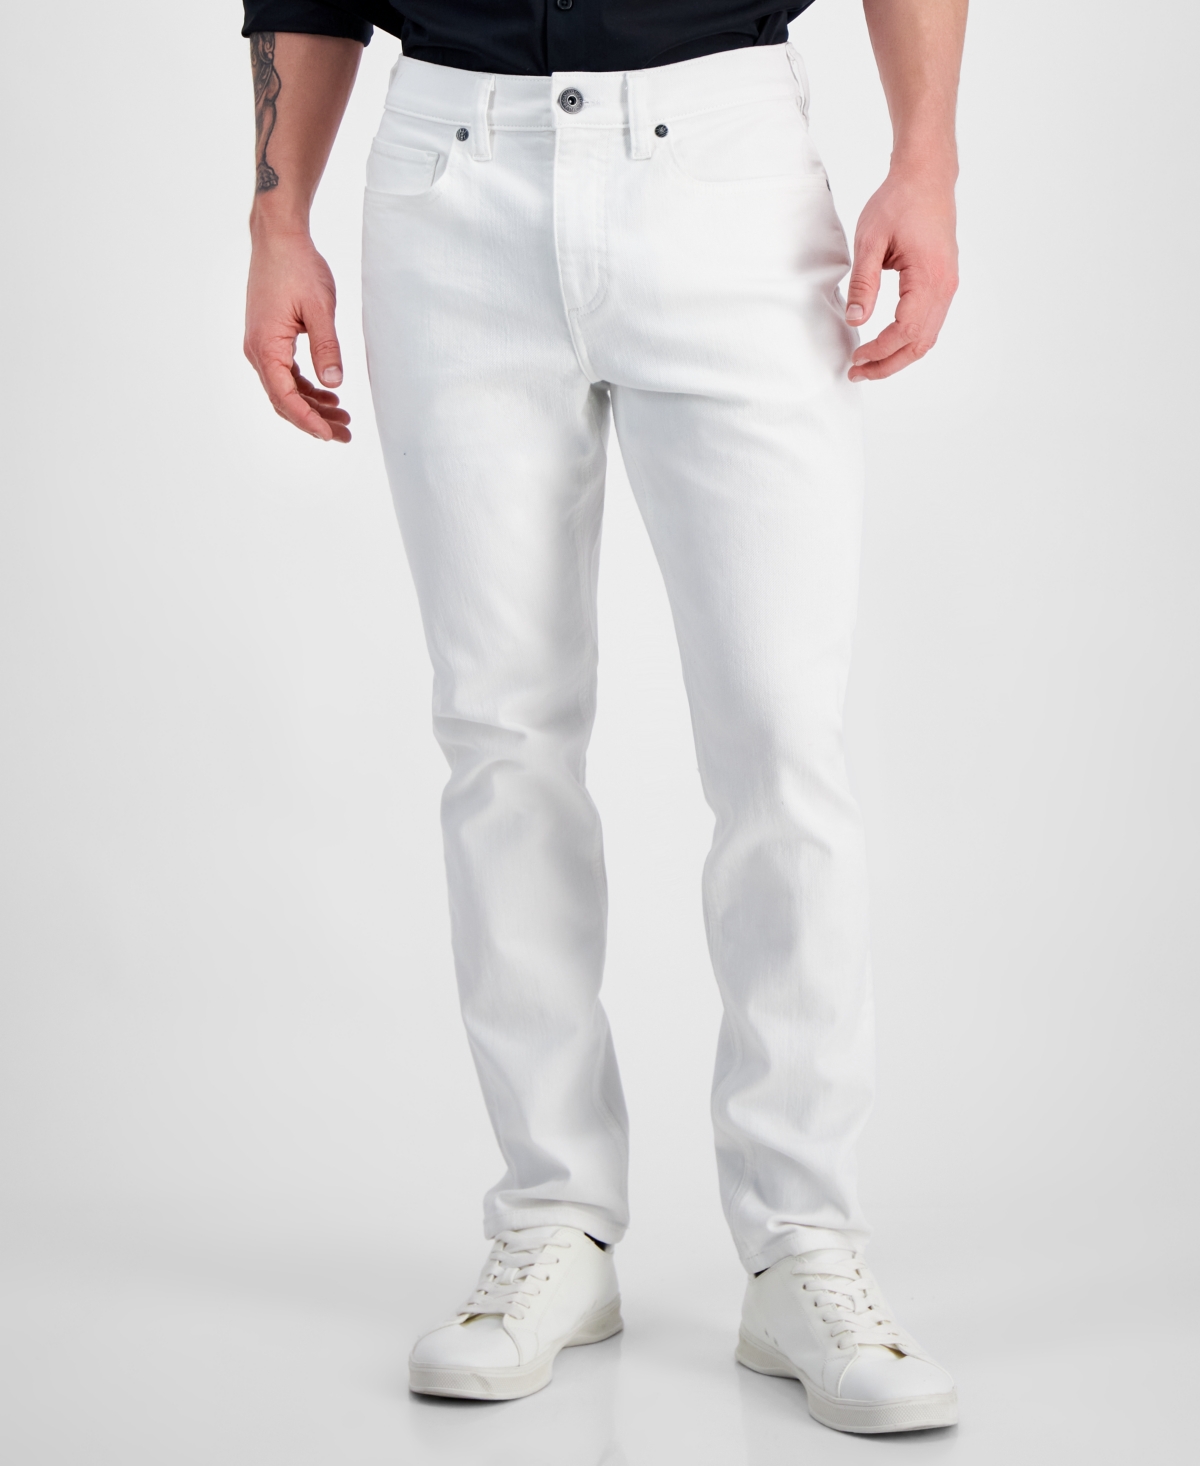 Men's Athletic-Slim Fit Jeans, Created for Macy's - Griffin